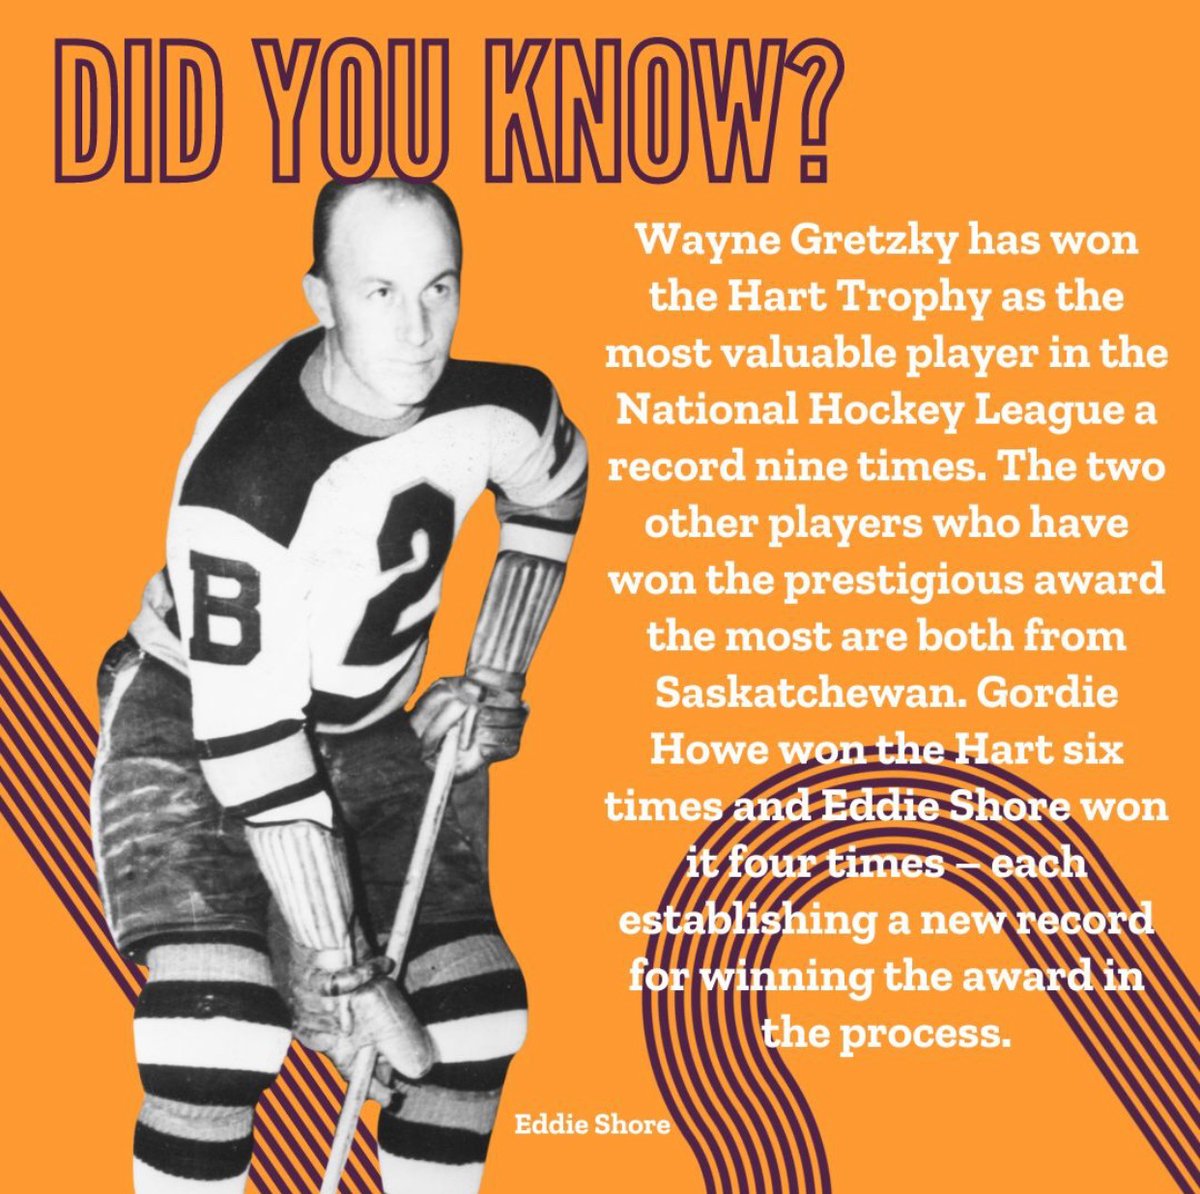 The record for the most Hart Trophies won in an NHL career was broken in 1938 by a Saskatchewan-born player and again in 1960 by another Saskatchewan-born player before Wayne Gretzky broke the record in 1986 during his streak of eight straight years of being named the NHL’s MVP.